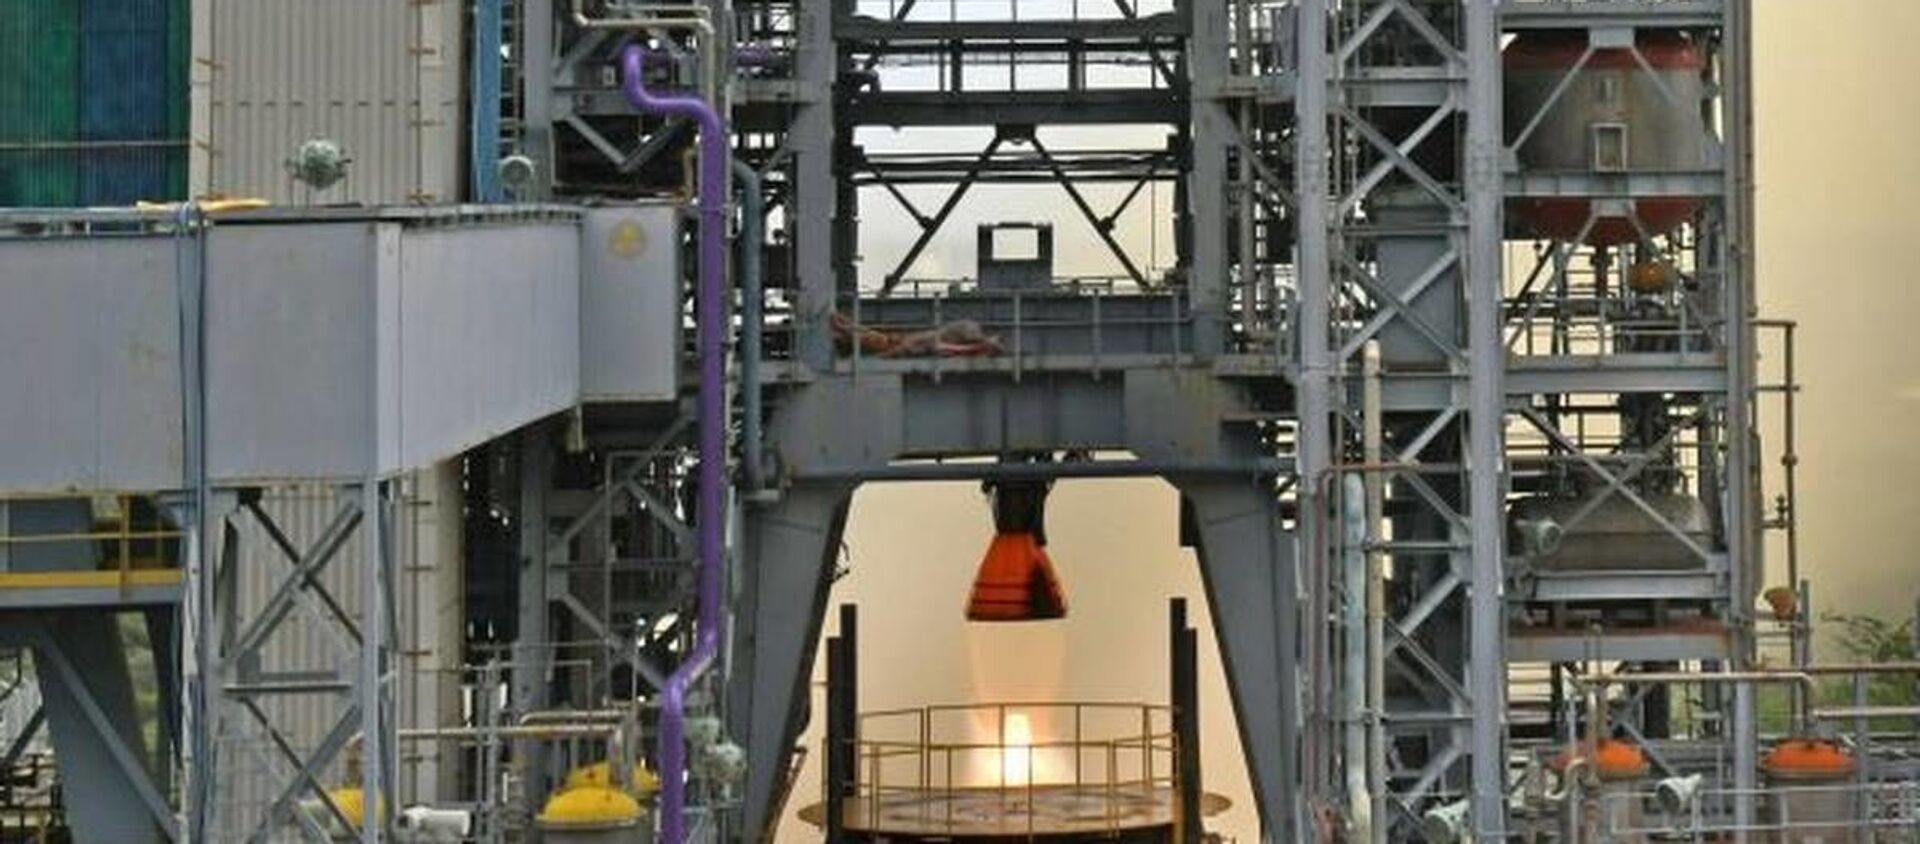 ISRO successfully conducted the hot test of the liquid propellant Vikas Engine for the core L110 liquid stage of the human-rated GSLV MkIII vehicle, as part of engine qualification requirements for the Gaganyaan programme - Sputnik International, 1920, 15.07.2021